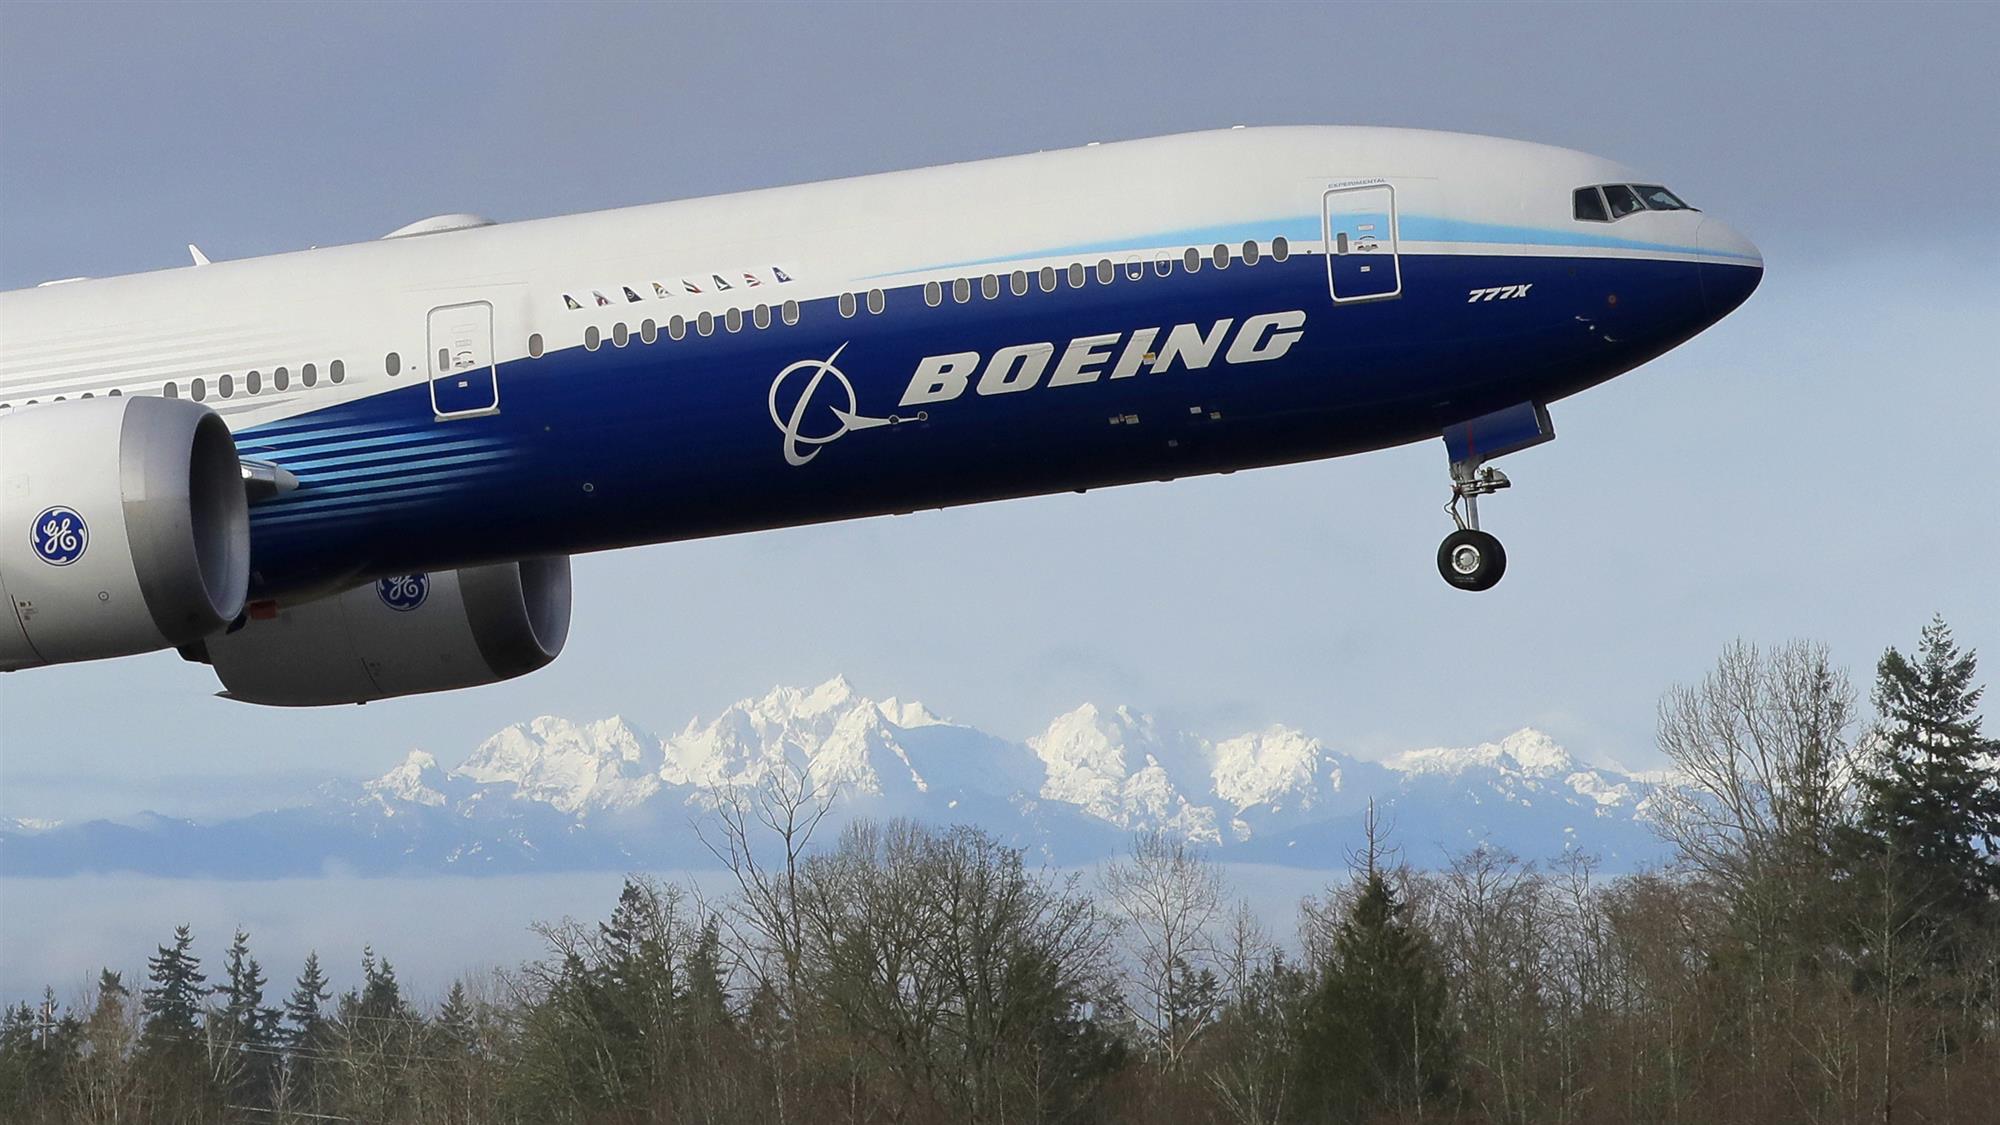 will boeing stock go up